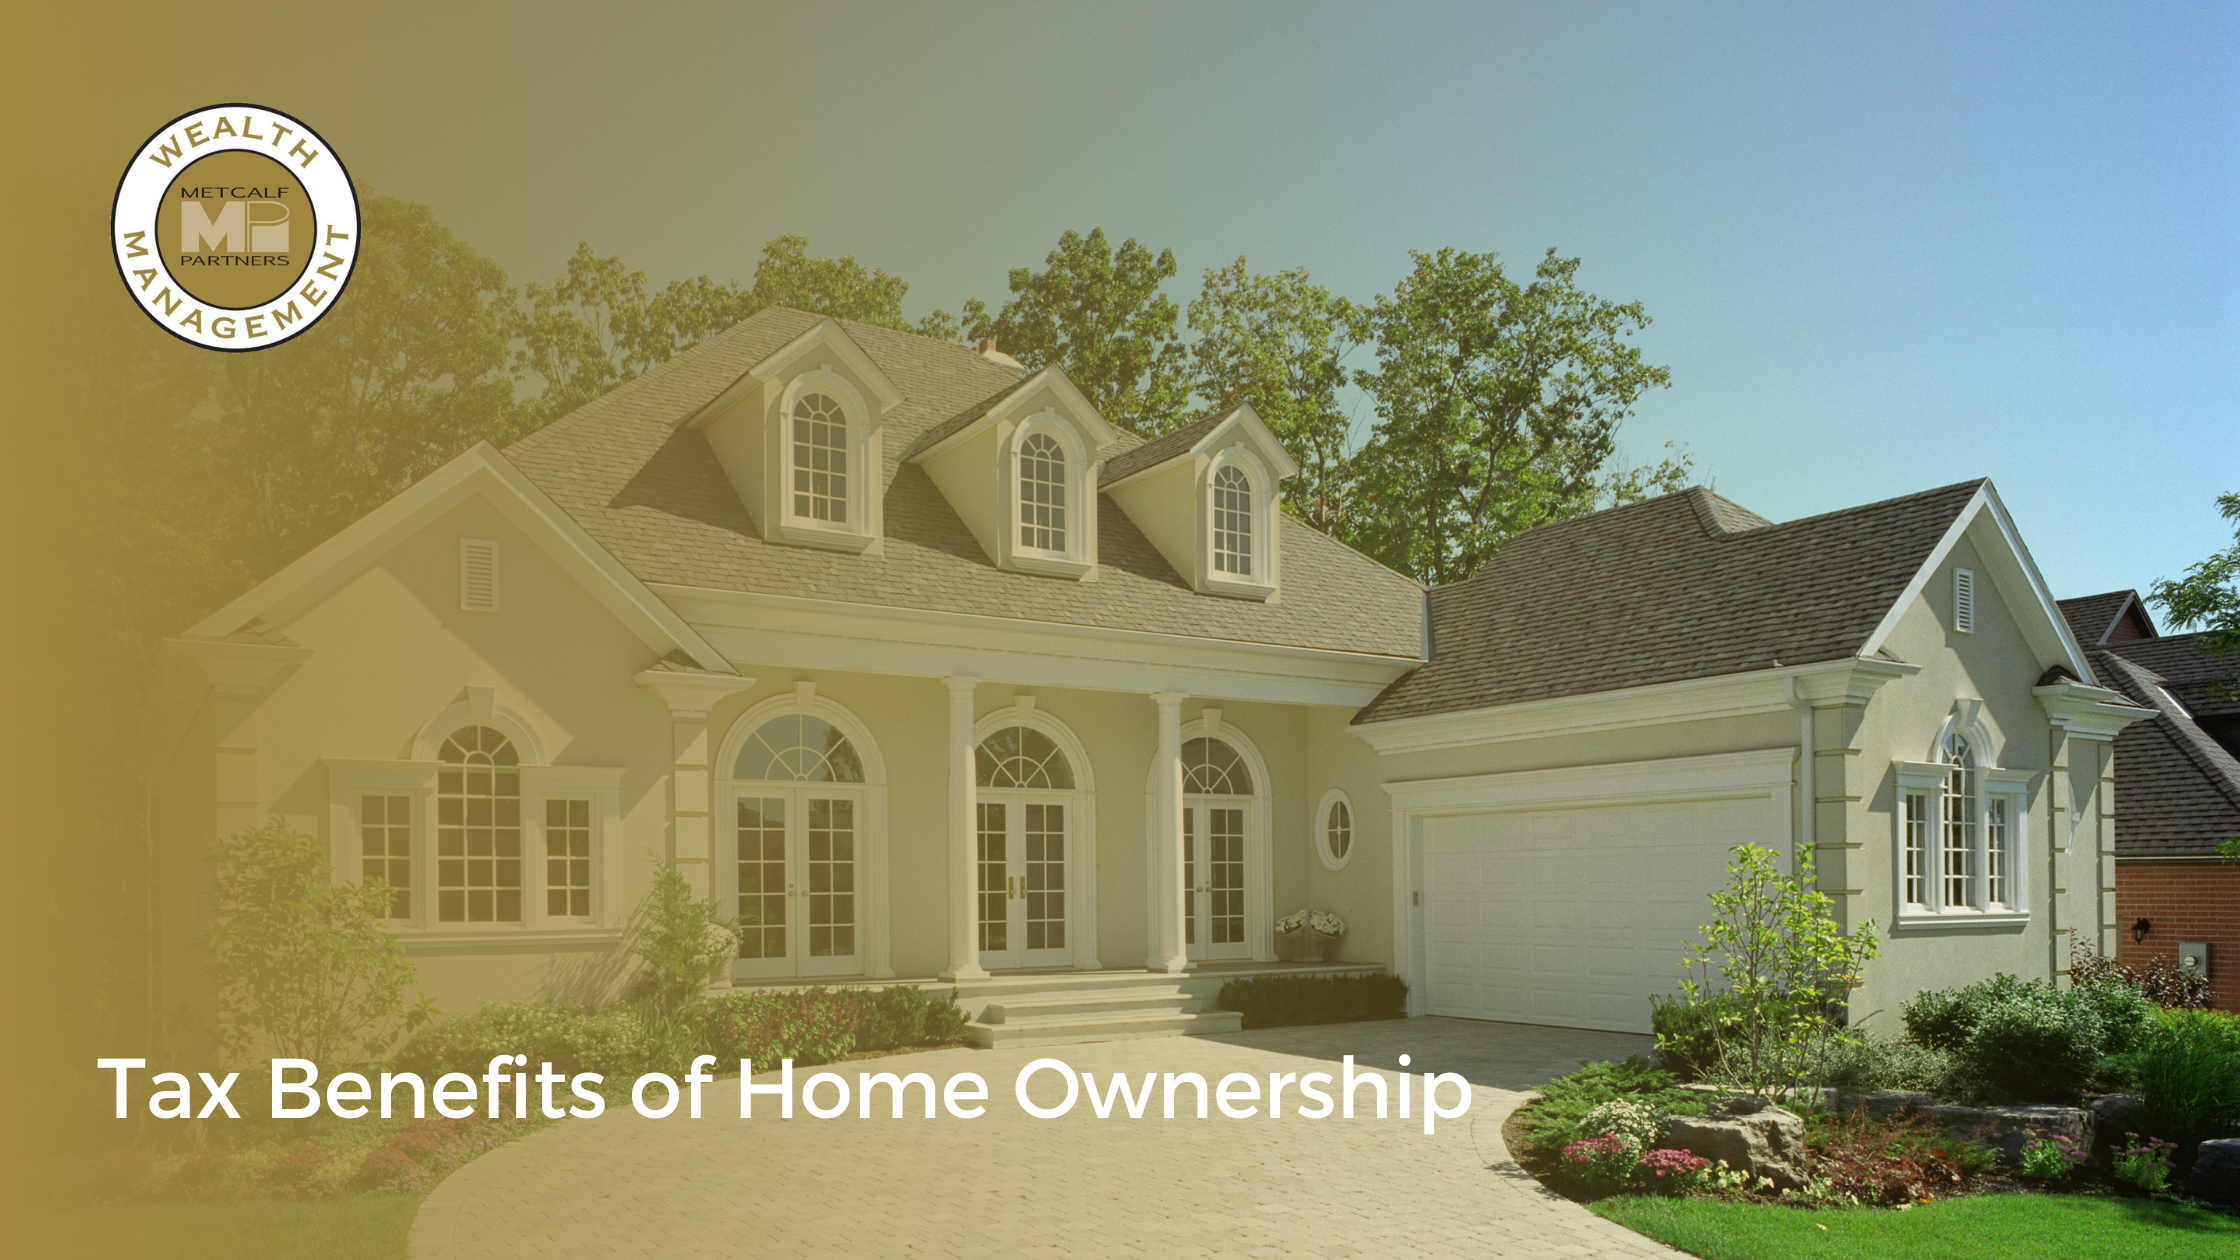 Featured image for “Tax Benefits of Home Ownership”